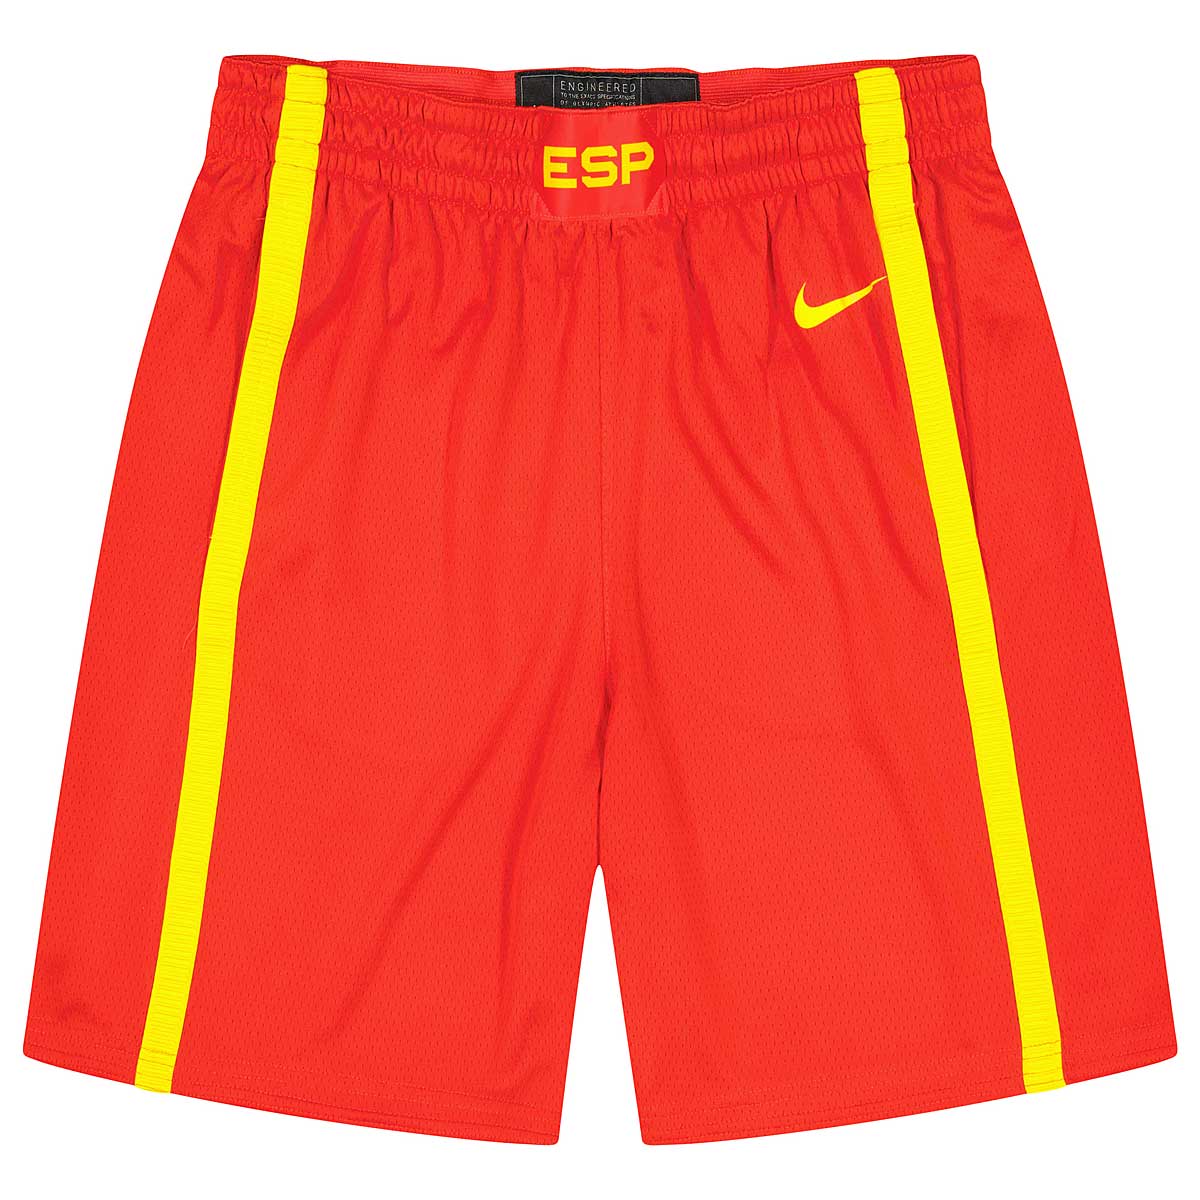 Image of Nike Fiba World Cup Spain Basketball Road Shorts, Challenge Red/midwest Gold